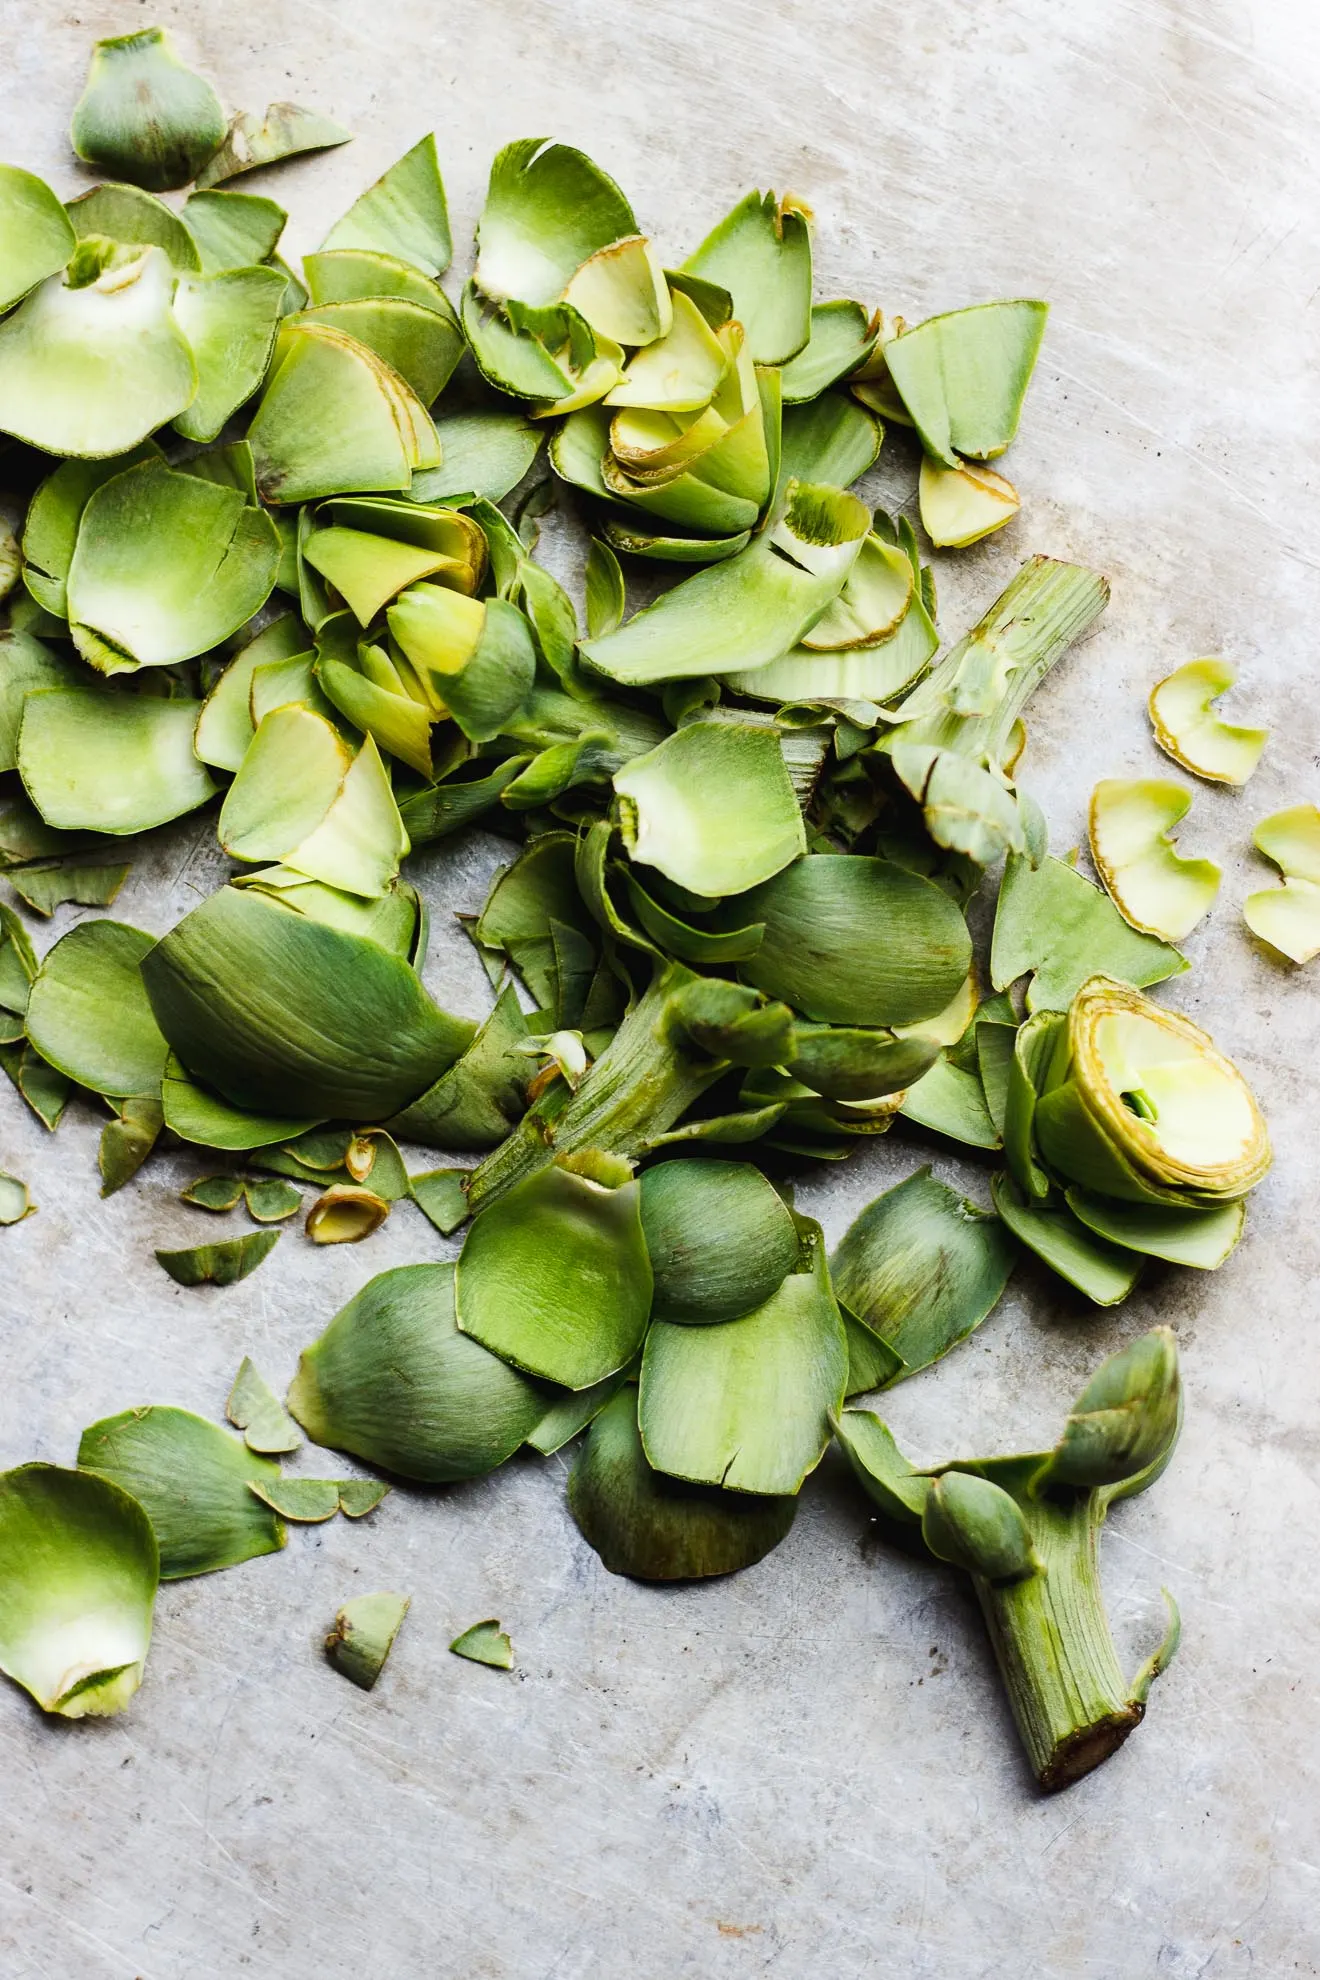 Easy Braised Artichokes with Lemon + Macadamia Nut Oil | Super easy stovetop braised artichokes summed in vegetable broth and dressed with fresh lemon juice and macadamia nut oil. Artichokes as an entree made easy. #artichokes #braisedartichokes